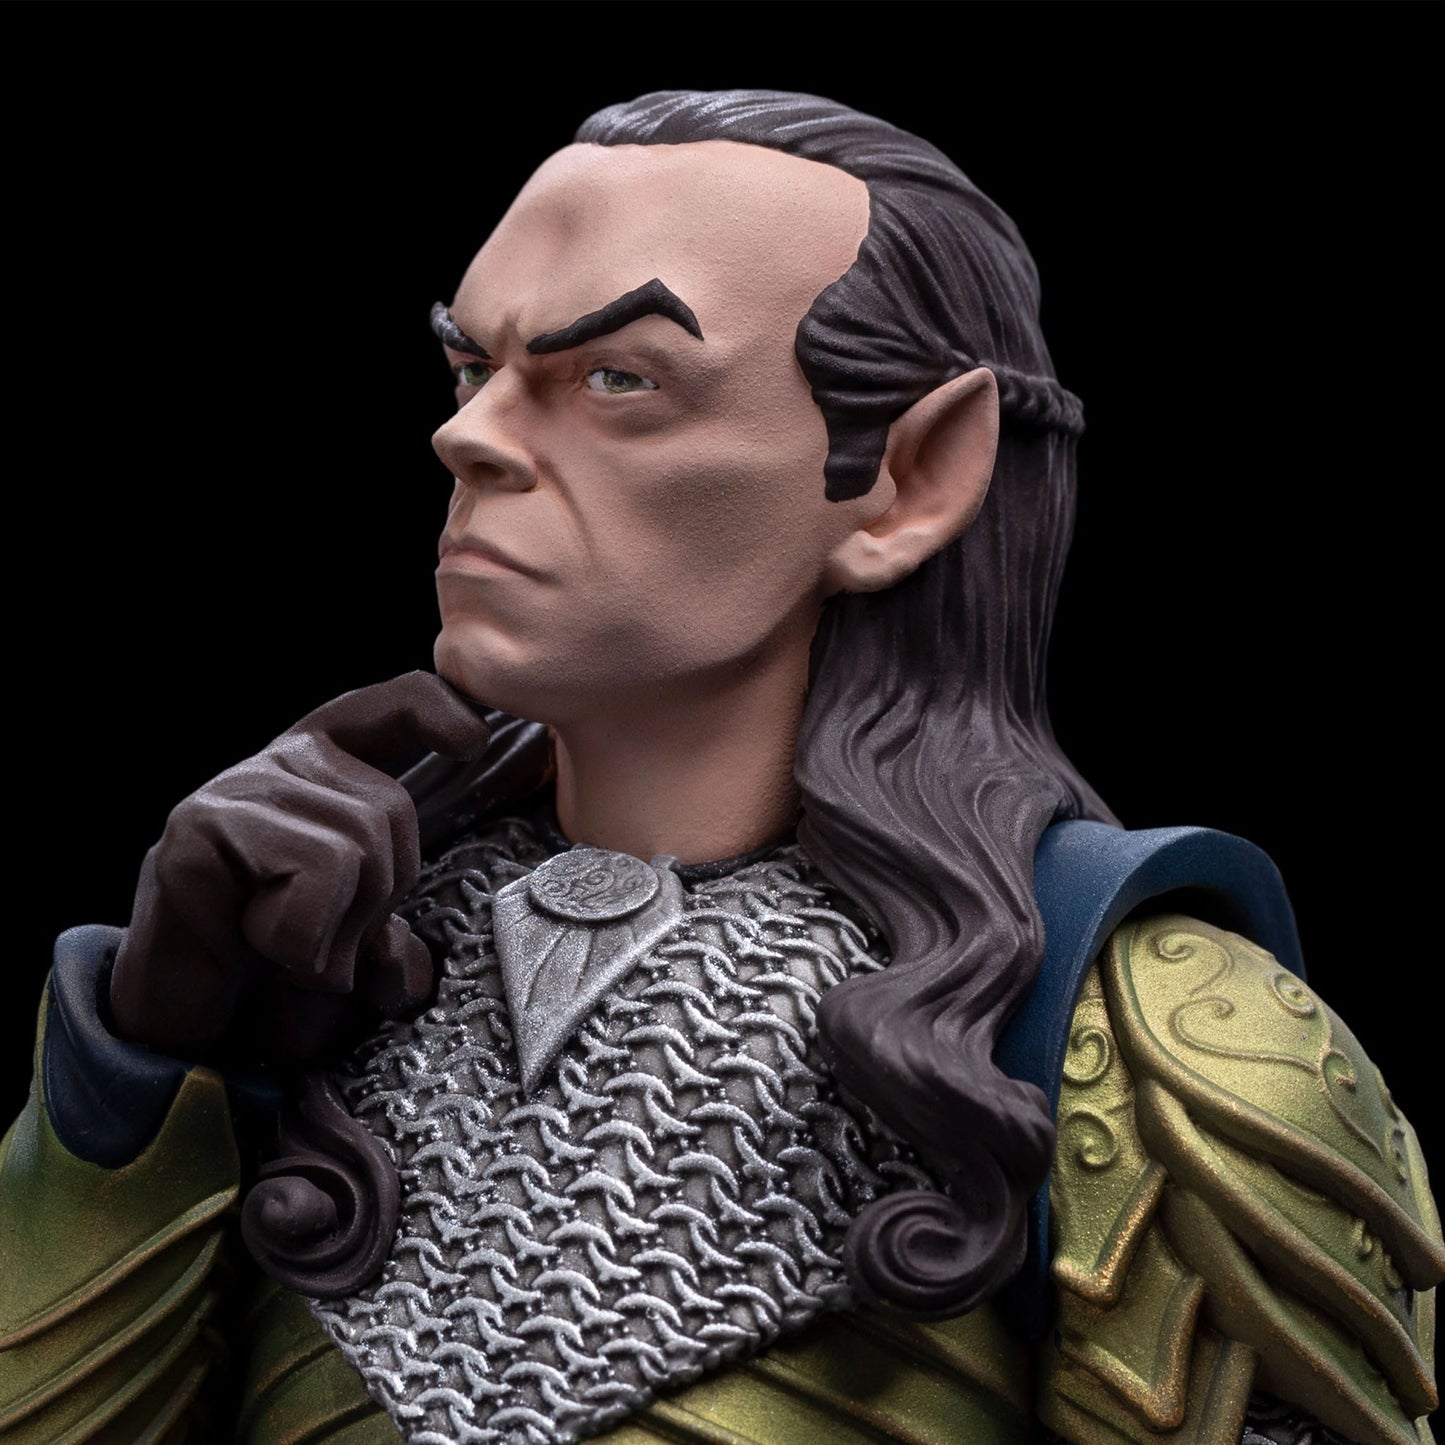 Elrond (Lord of the Rings) Mini Epics Statue by Weta Workshop